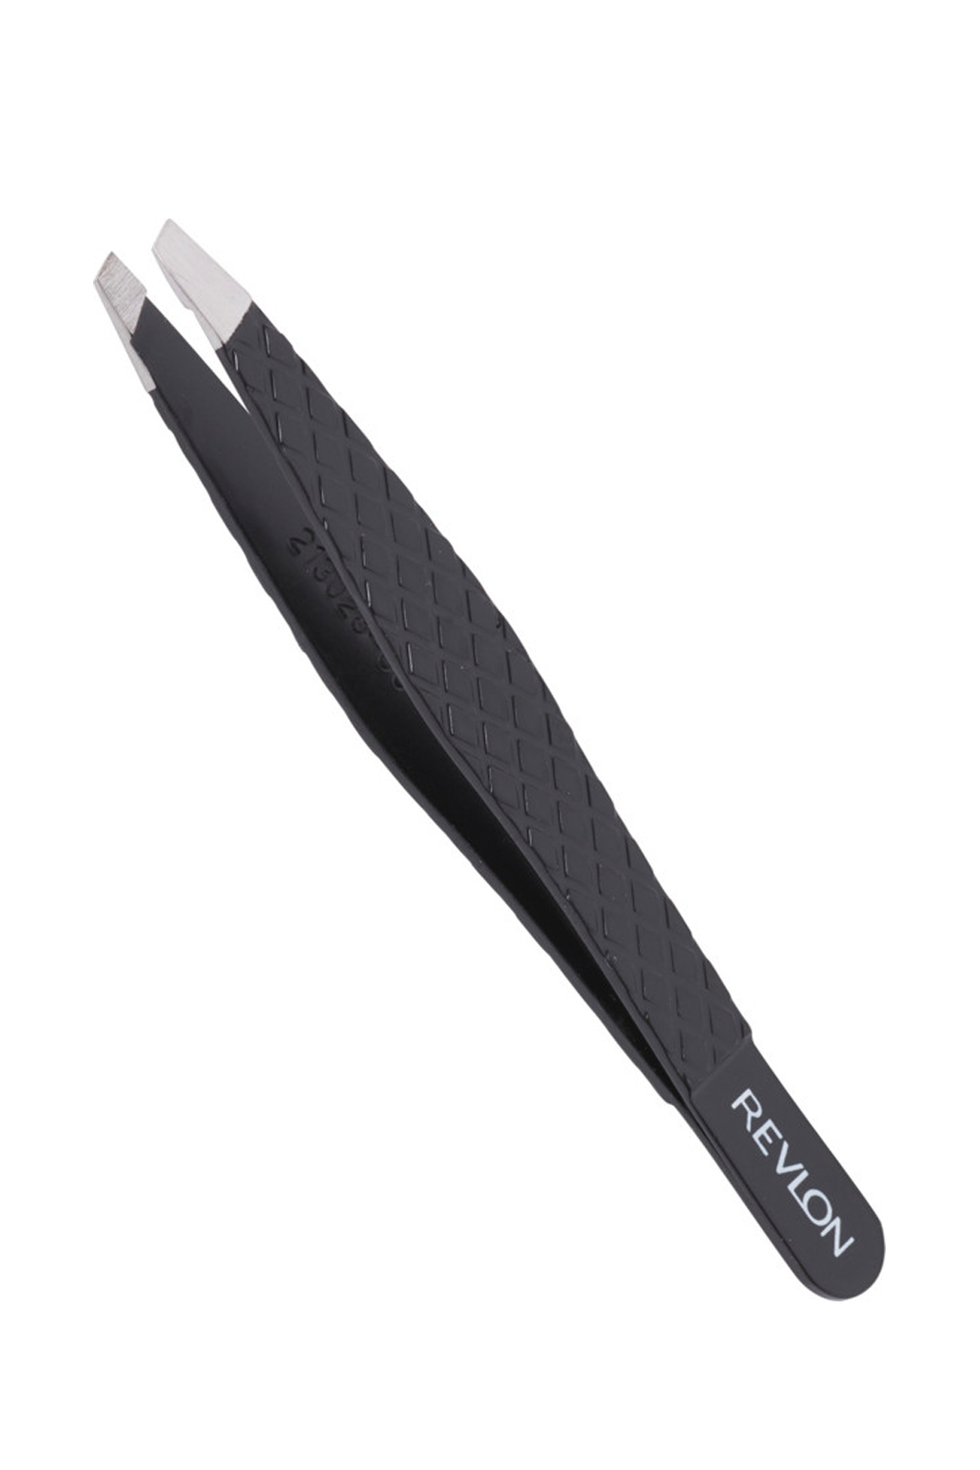 9 Best Tweezers of 2022 for Eyebrow Shaping and Plucking